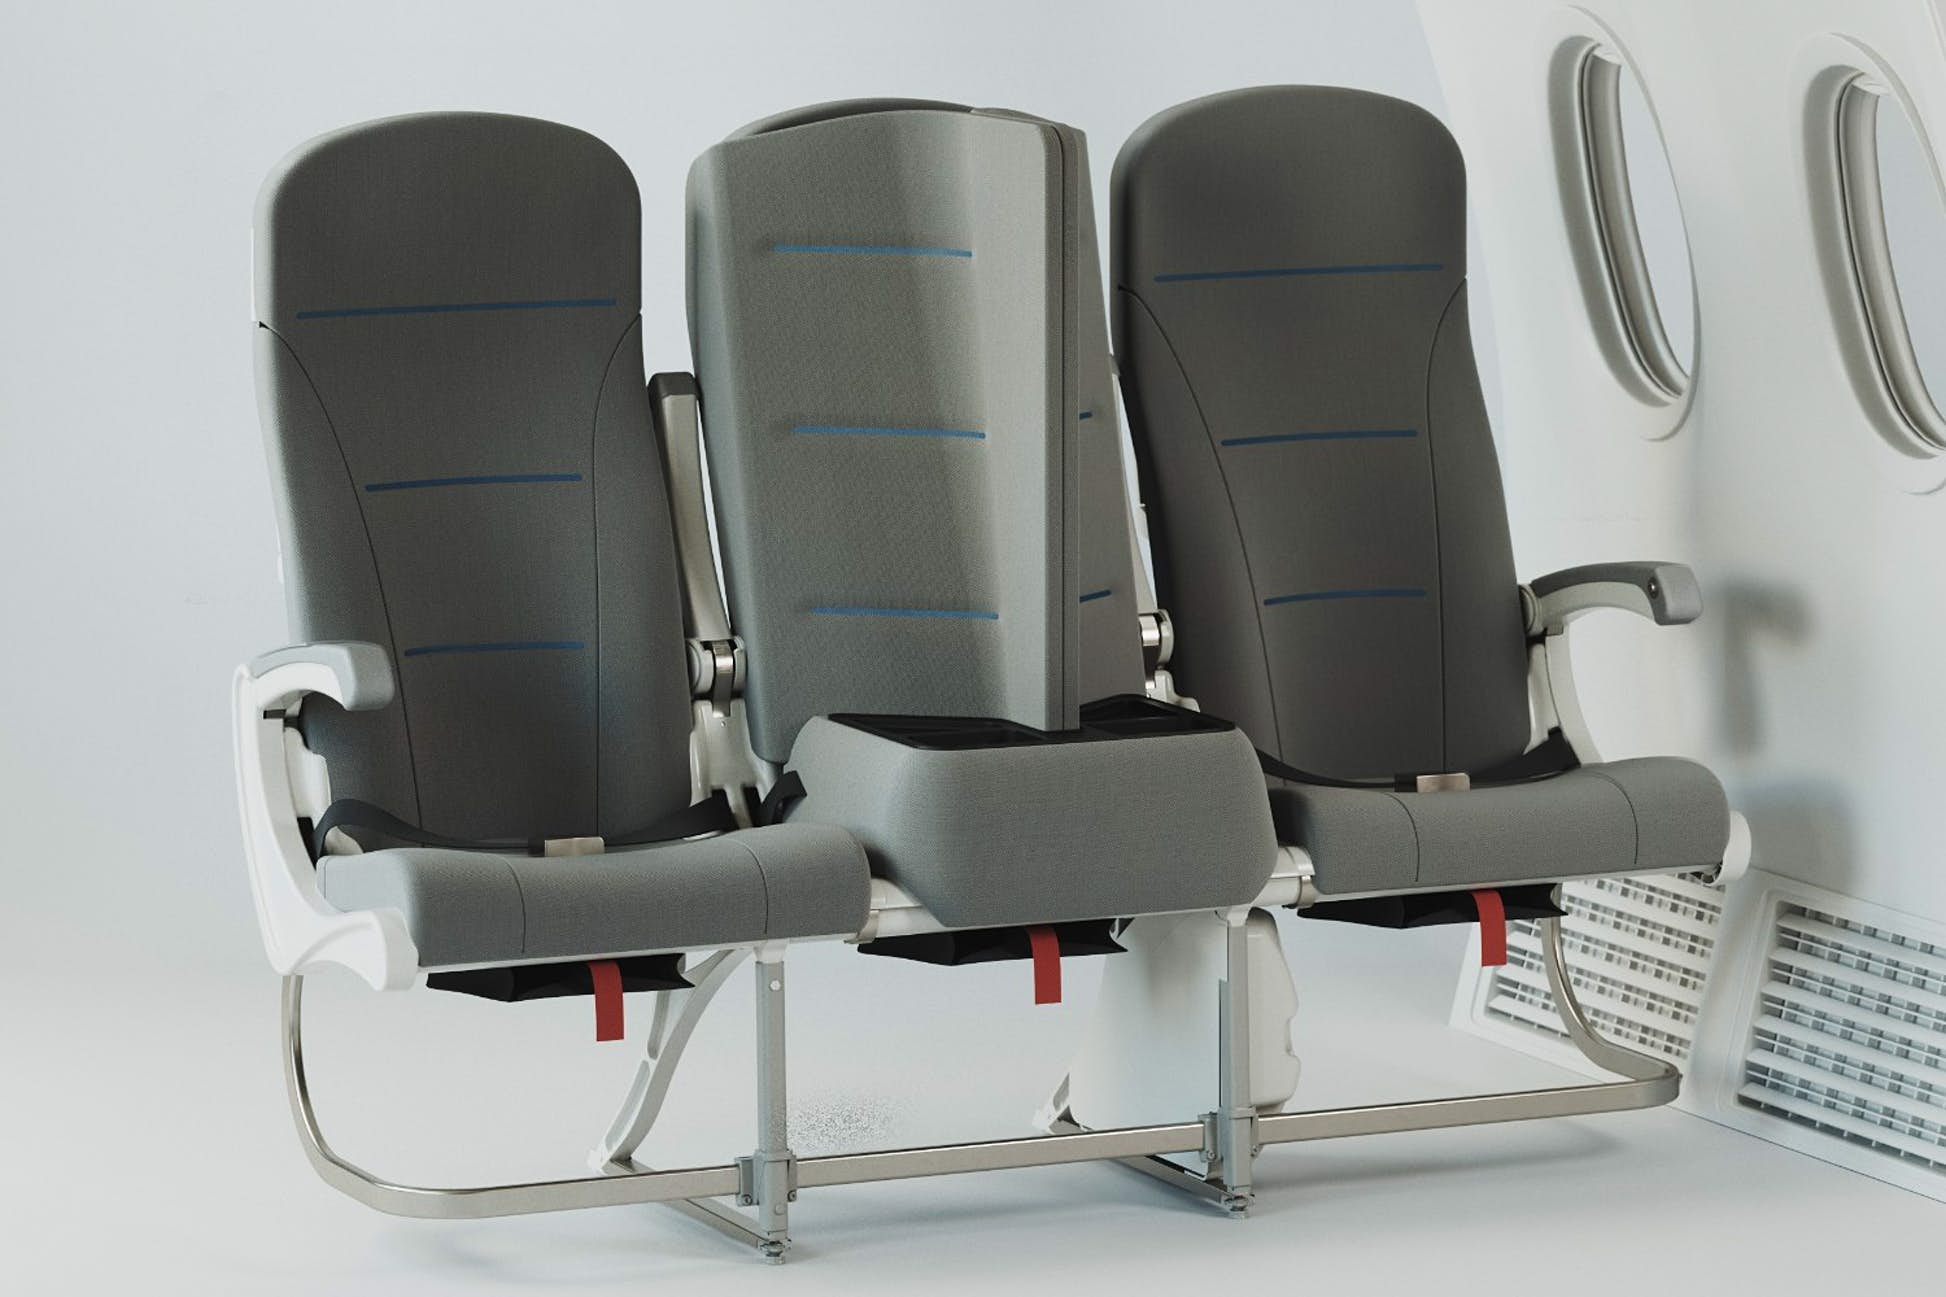 The seat could be a potential solution for social distancing requirements around travel © Universal Movement